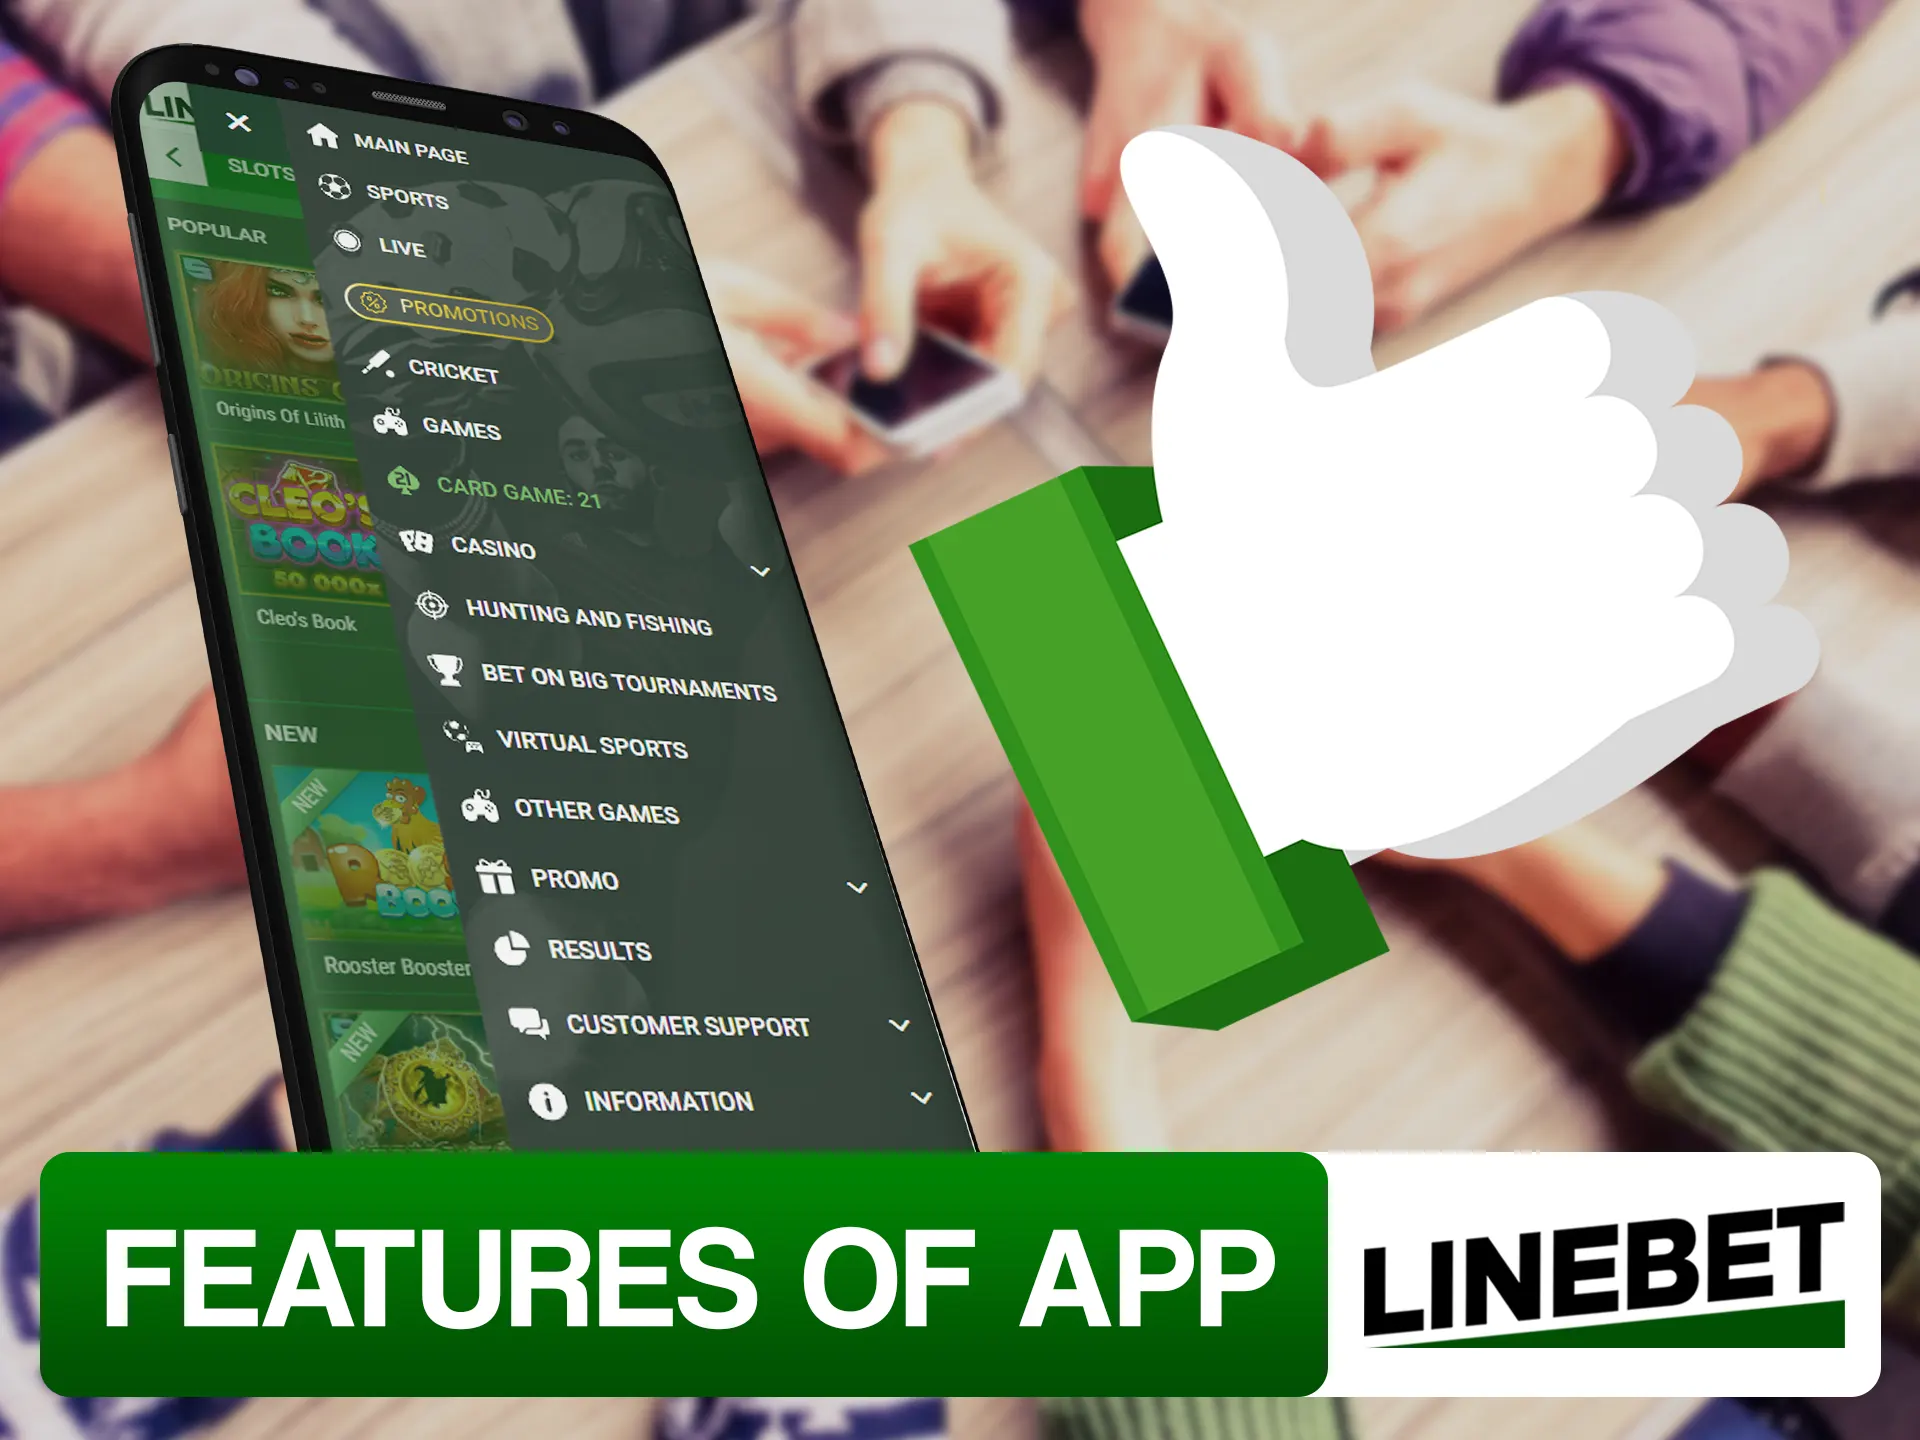 Search for new cool features by using Linebet app.